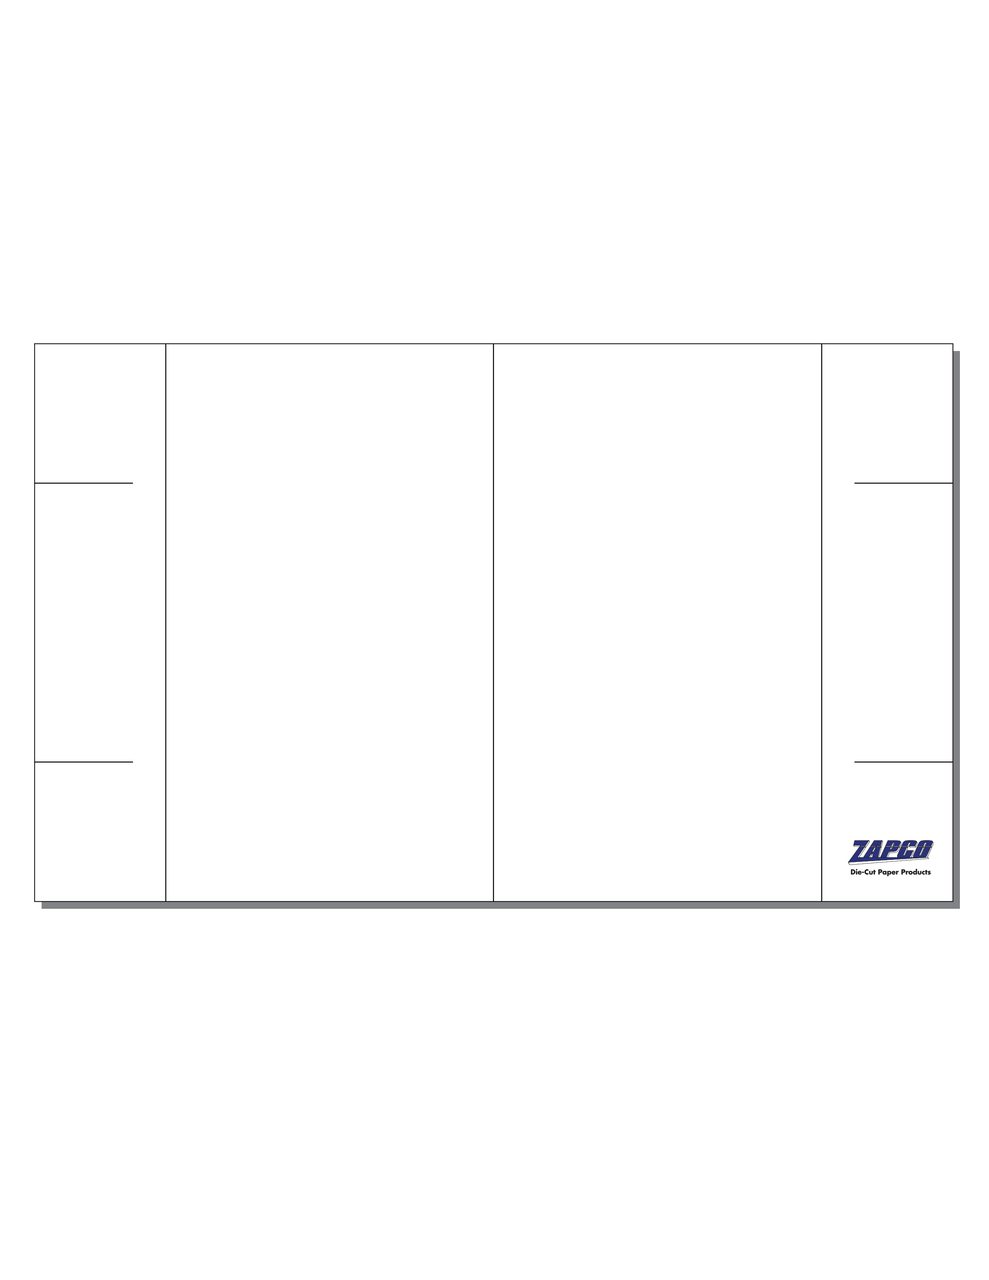 Item 306: 1-Up 5" x 8 1/2" or 2-Up 5" x 4 1/4" Table Tent Paper 8 1/2" x 14" Sheet (250 Sheets)